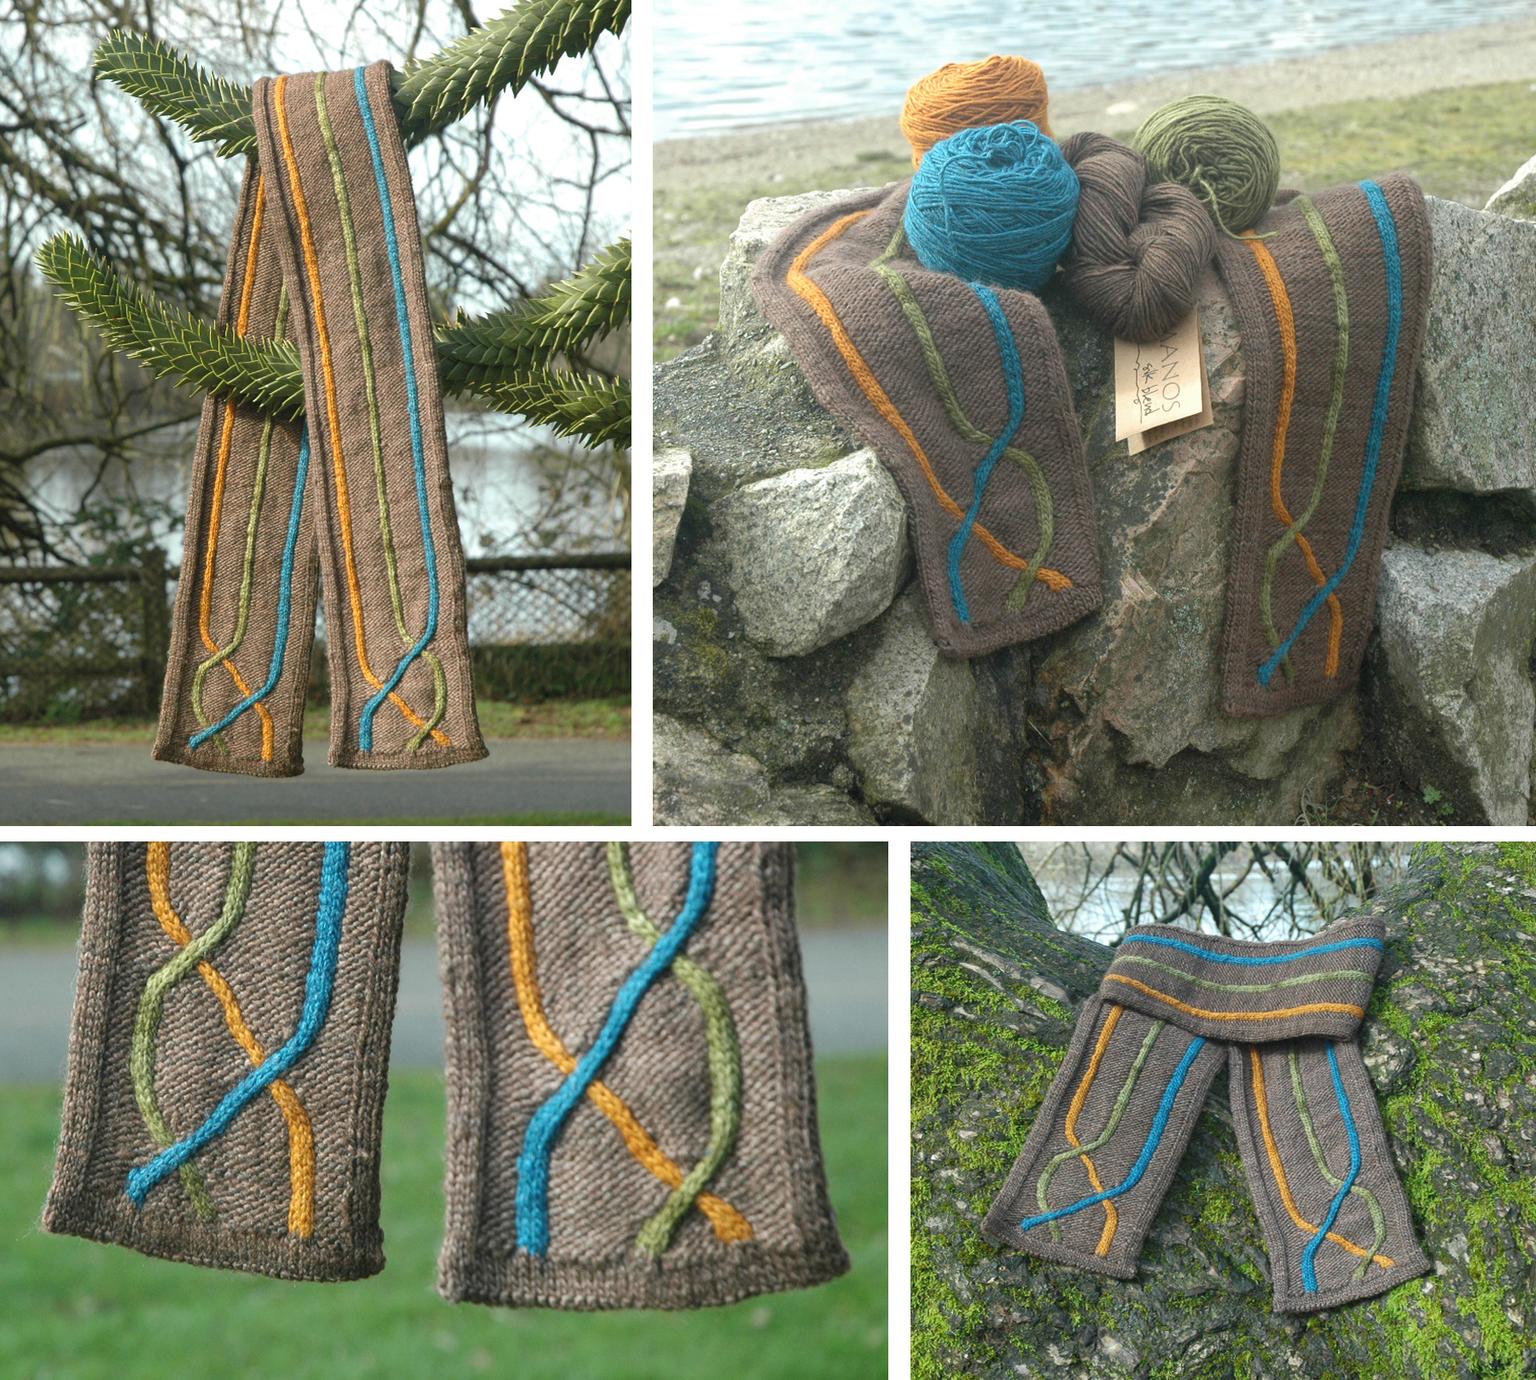 Image for entry 'The Yang-Baxter Scarf'